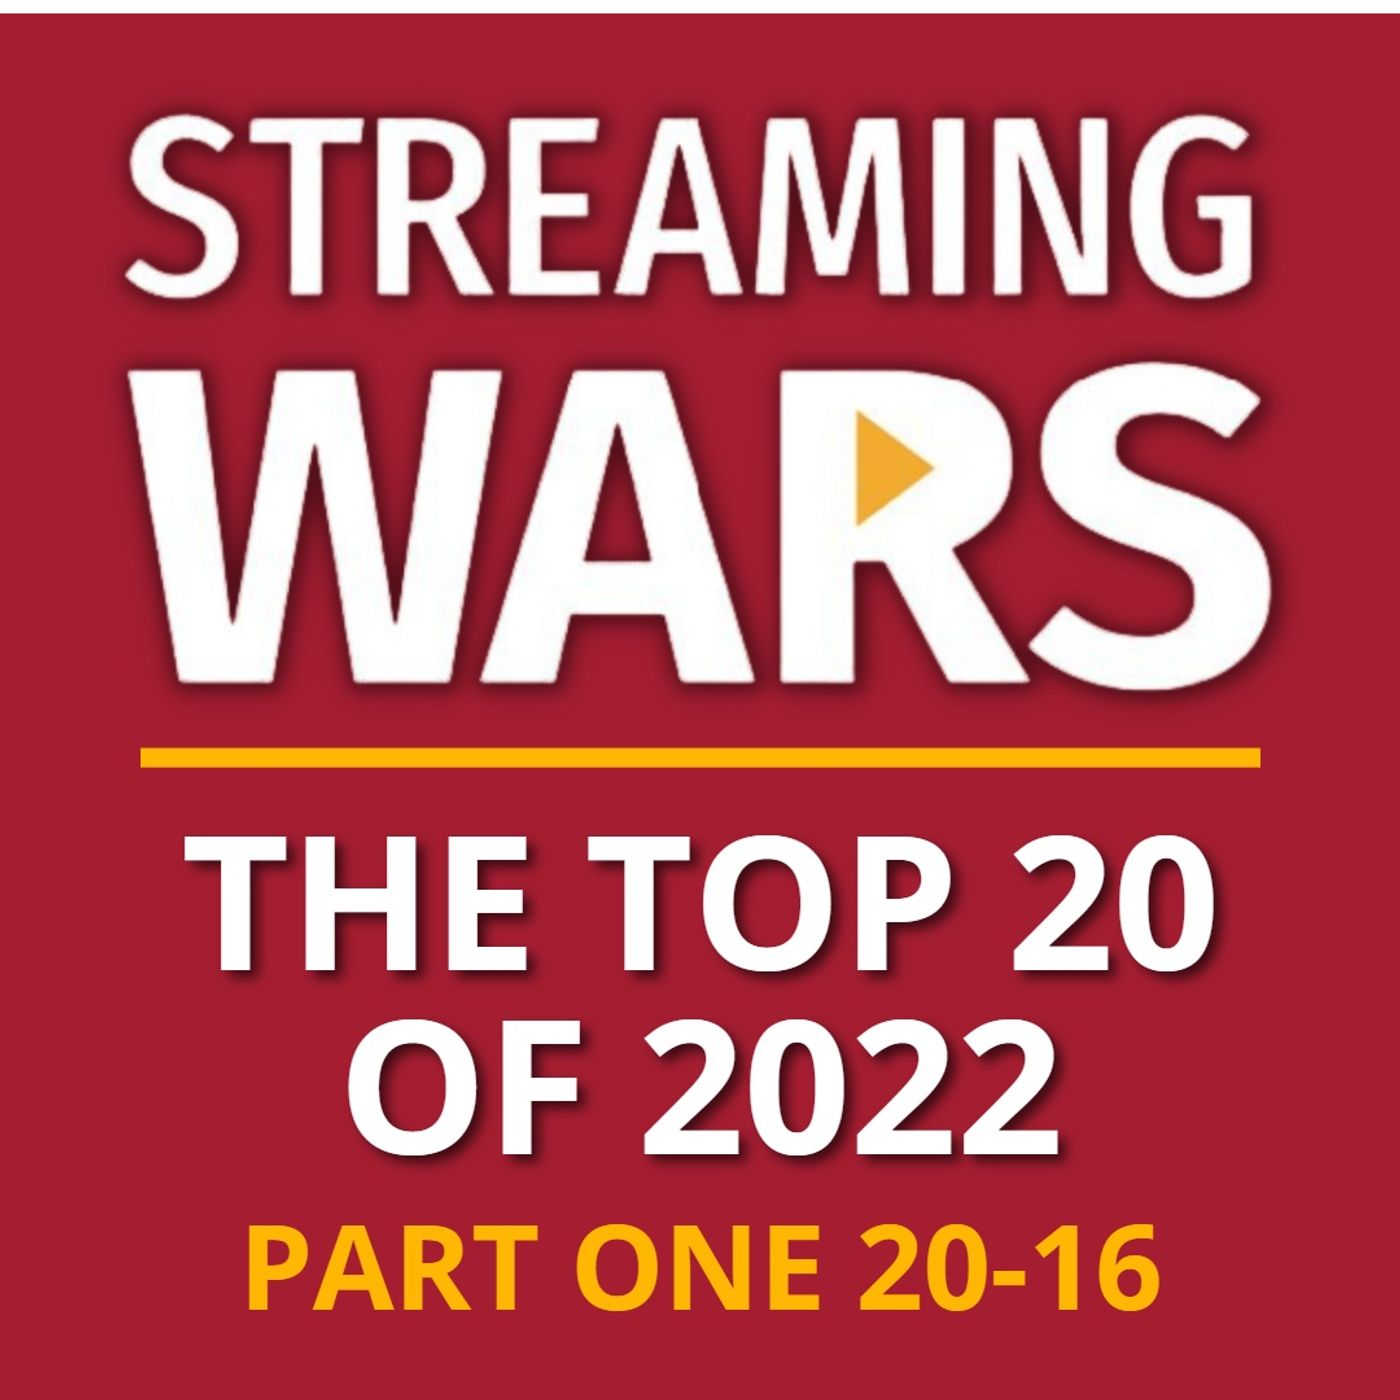 Streaming Wars - The Top 20 of 2022 (20-16)